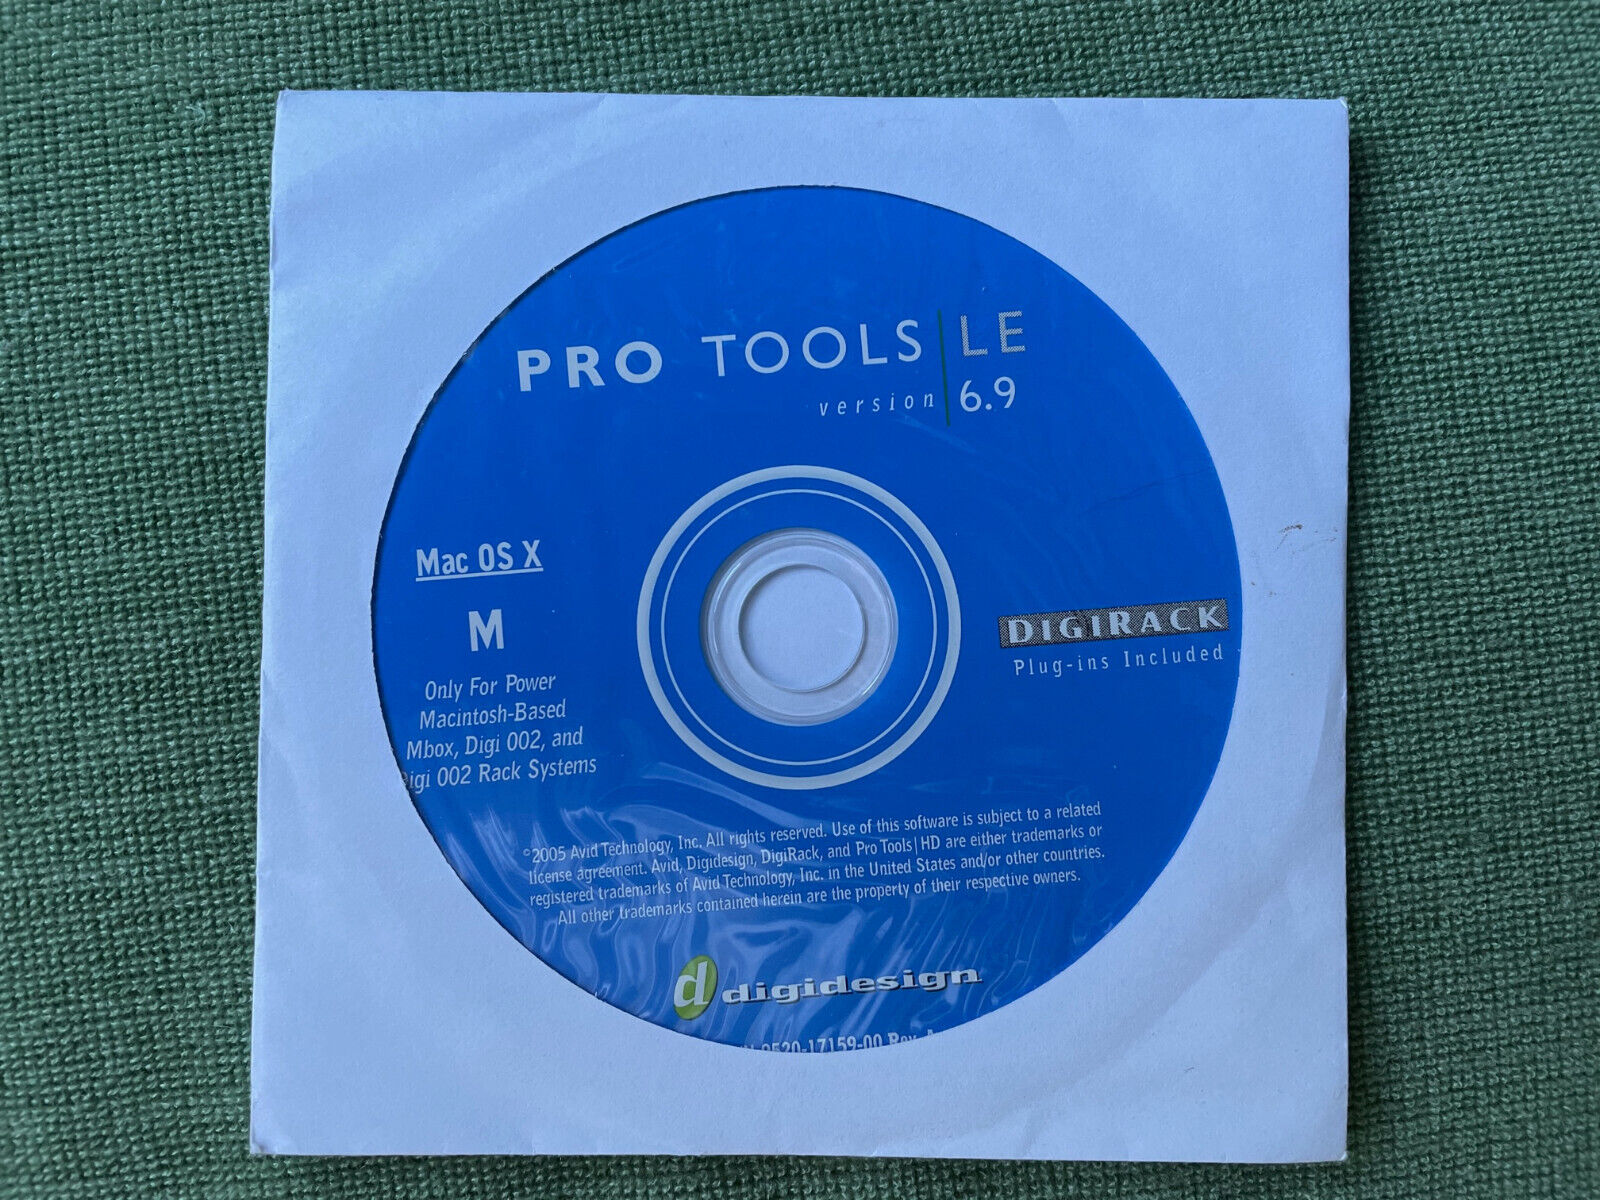 Pro Tools LE Version 6.9 Install Disk and Serial 